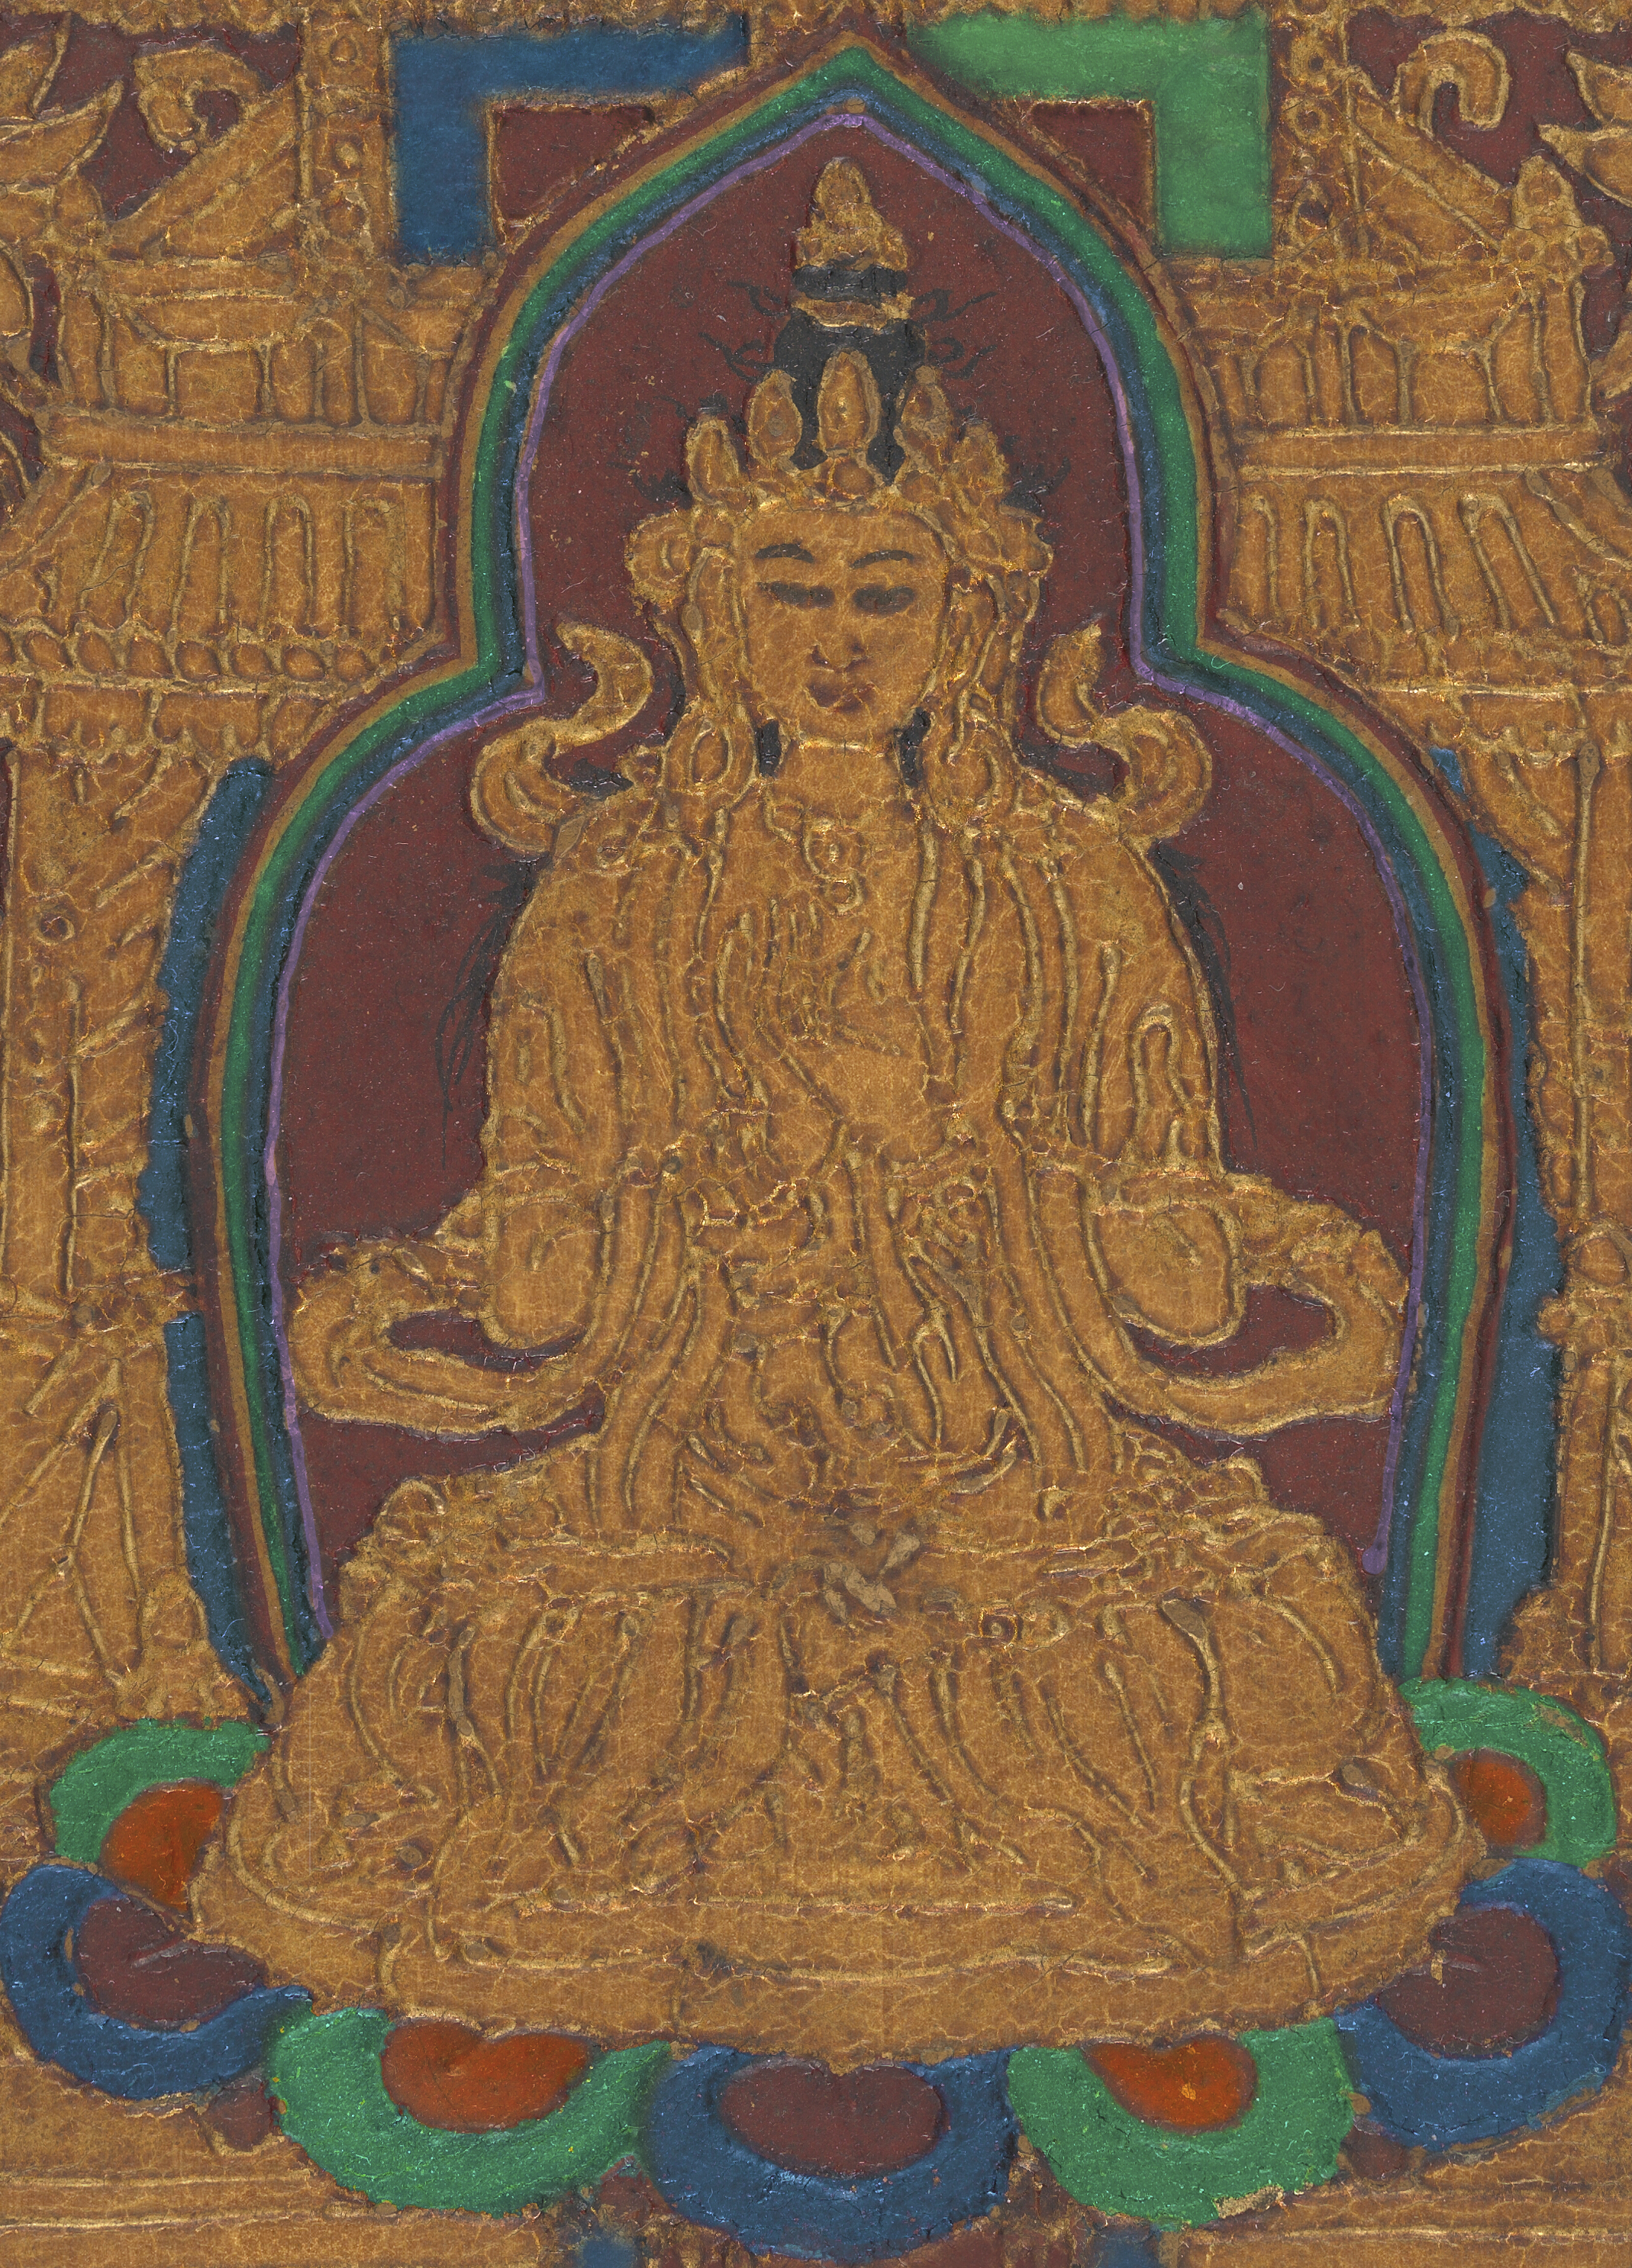 Gilded torana-shaped panel depicting a seated figure with red background and details in blue, green, orange, red, and purple.